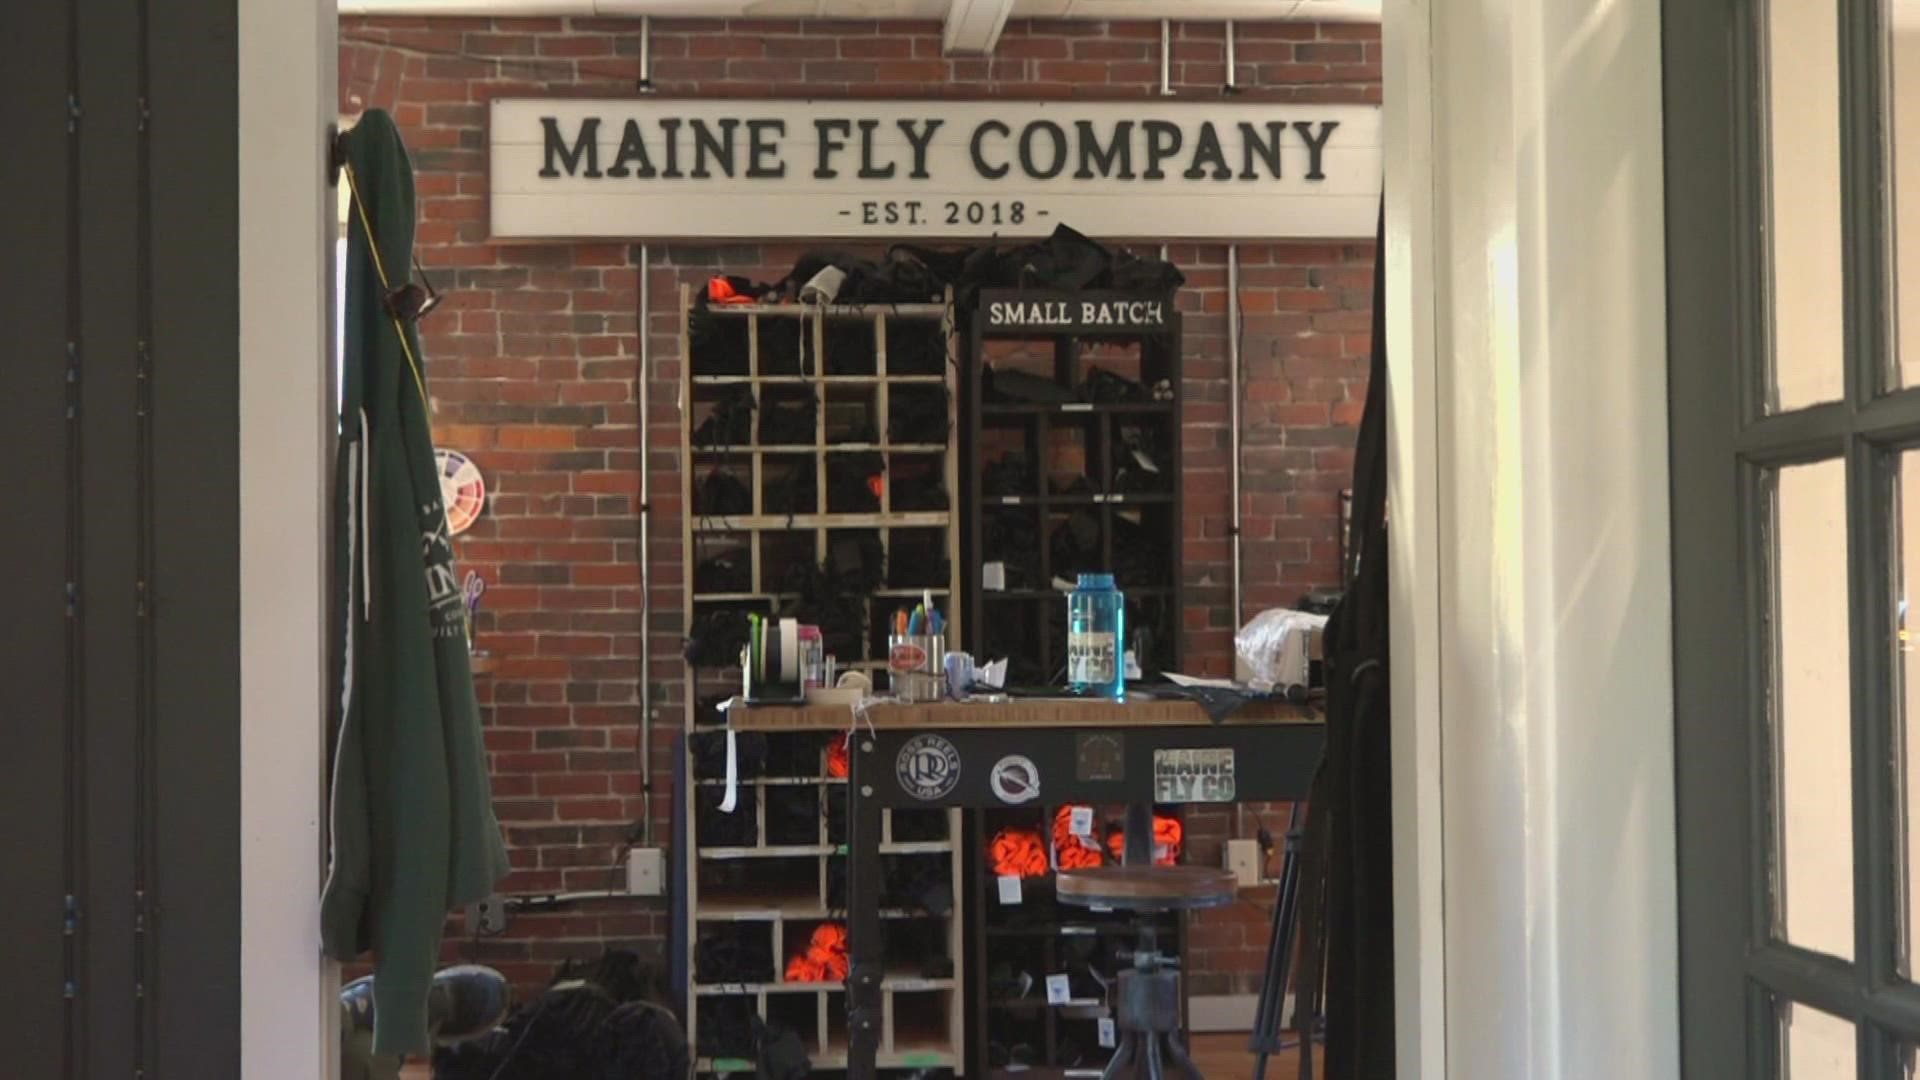 Jeff Davis launched Maine Fly Company after his father passed away.